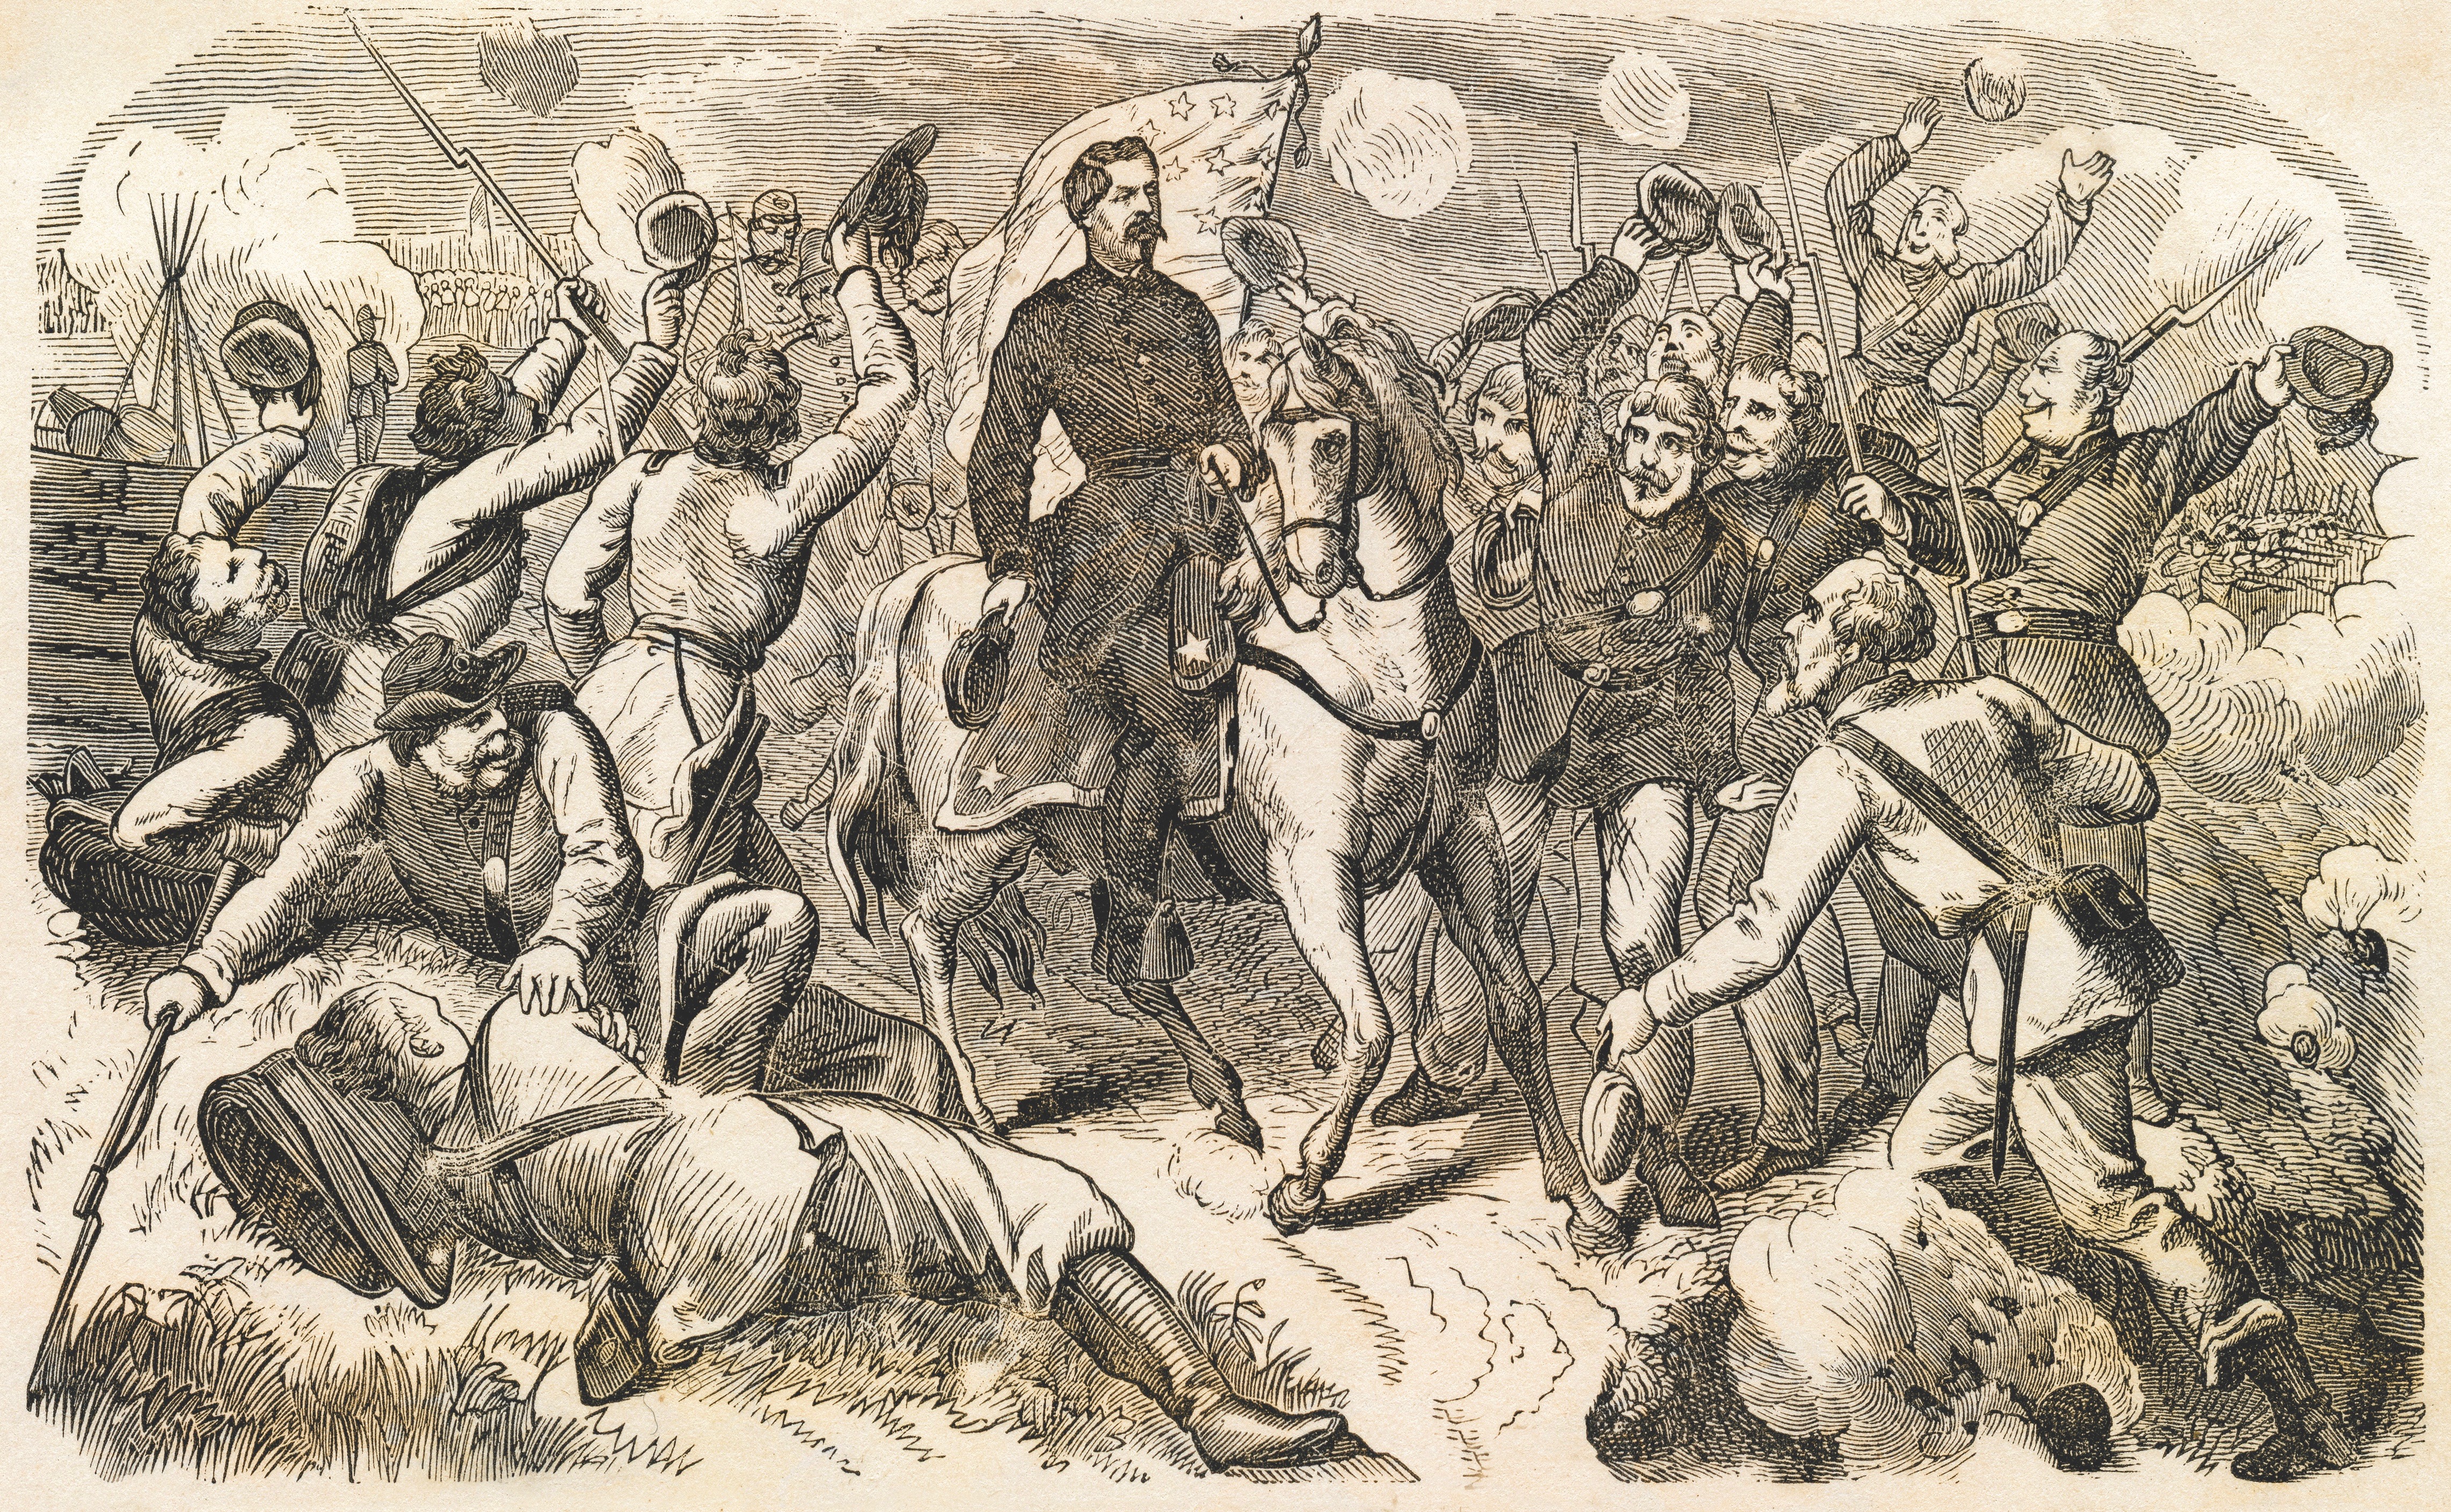 This illustration depicts a scene from the spring 1862 Peninsula Campaign, but similar incidents of McClellan adoration occurred when he rode near the Antietam front. (Our Boys)